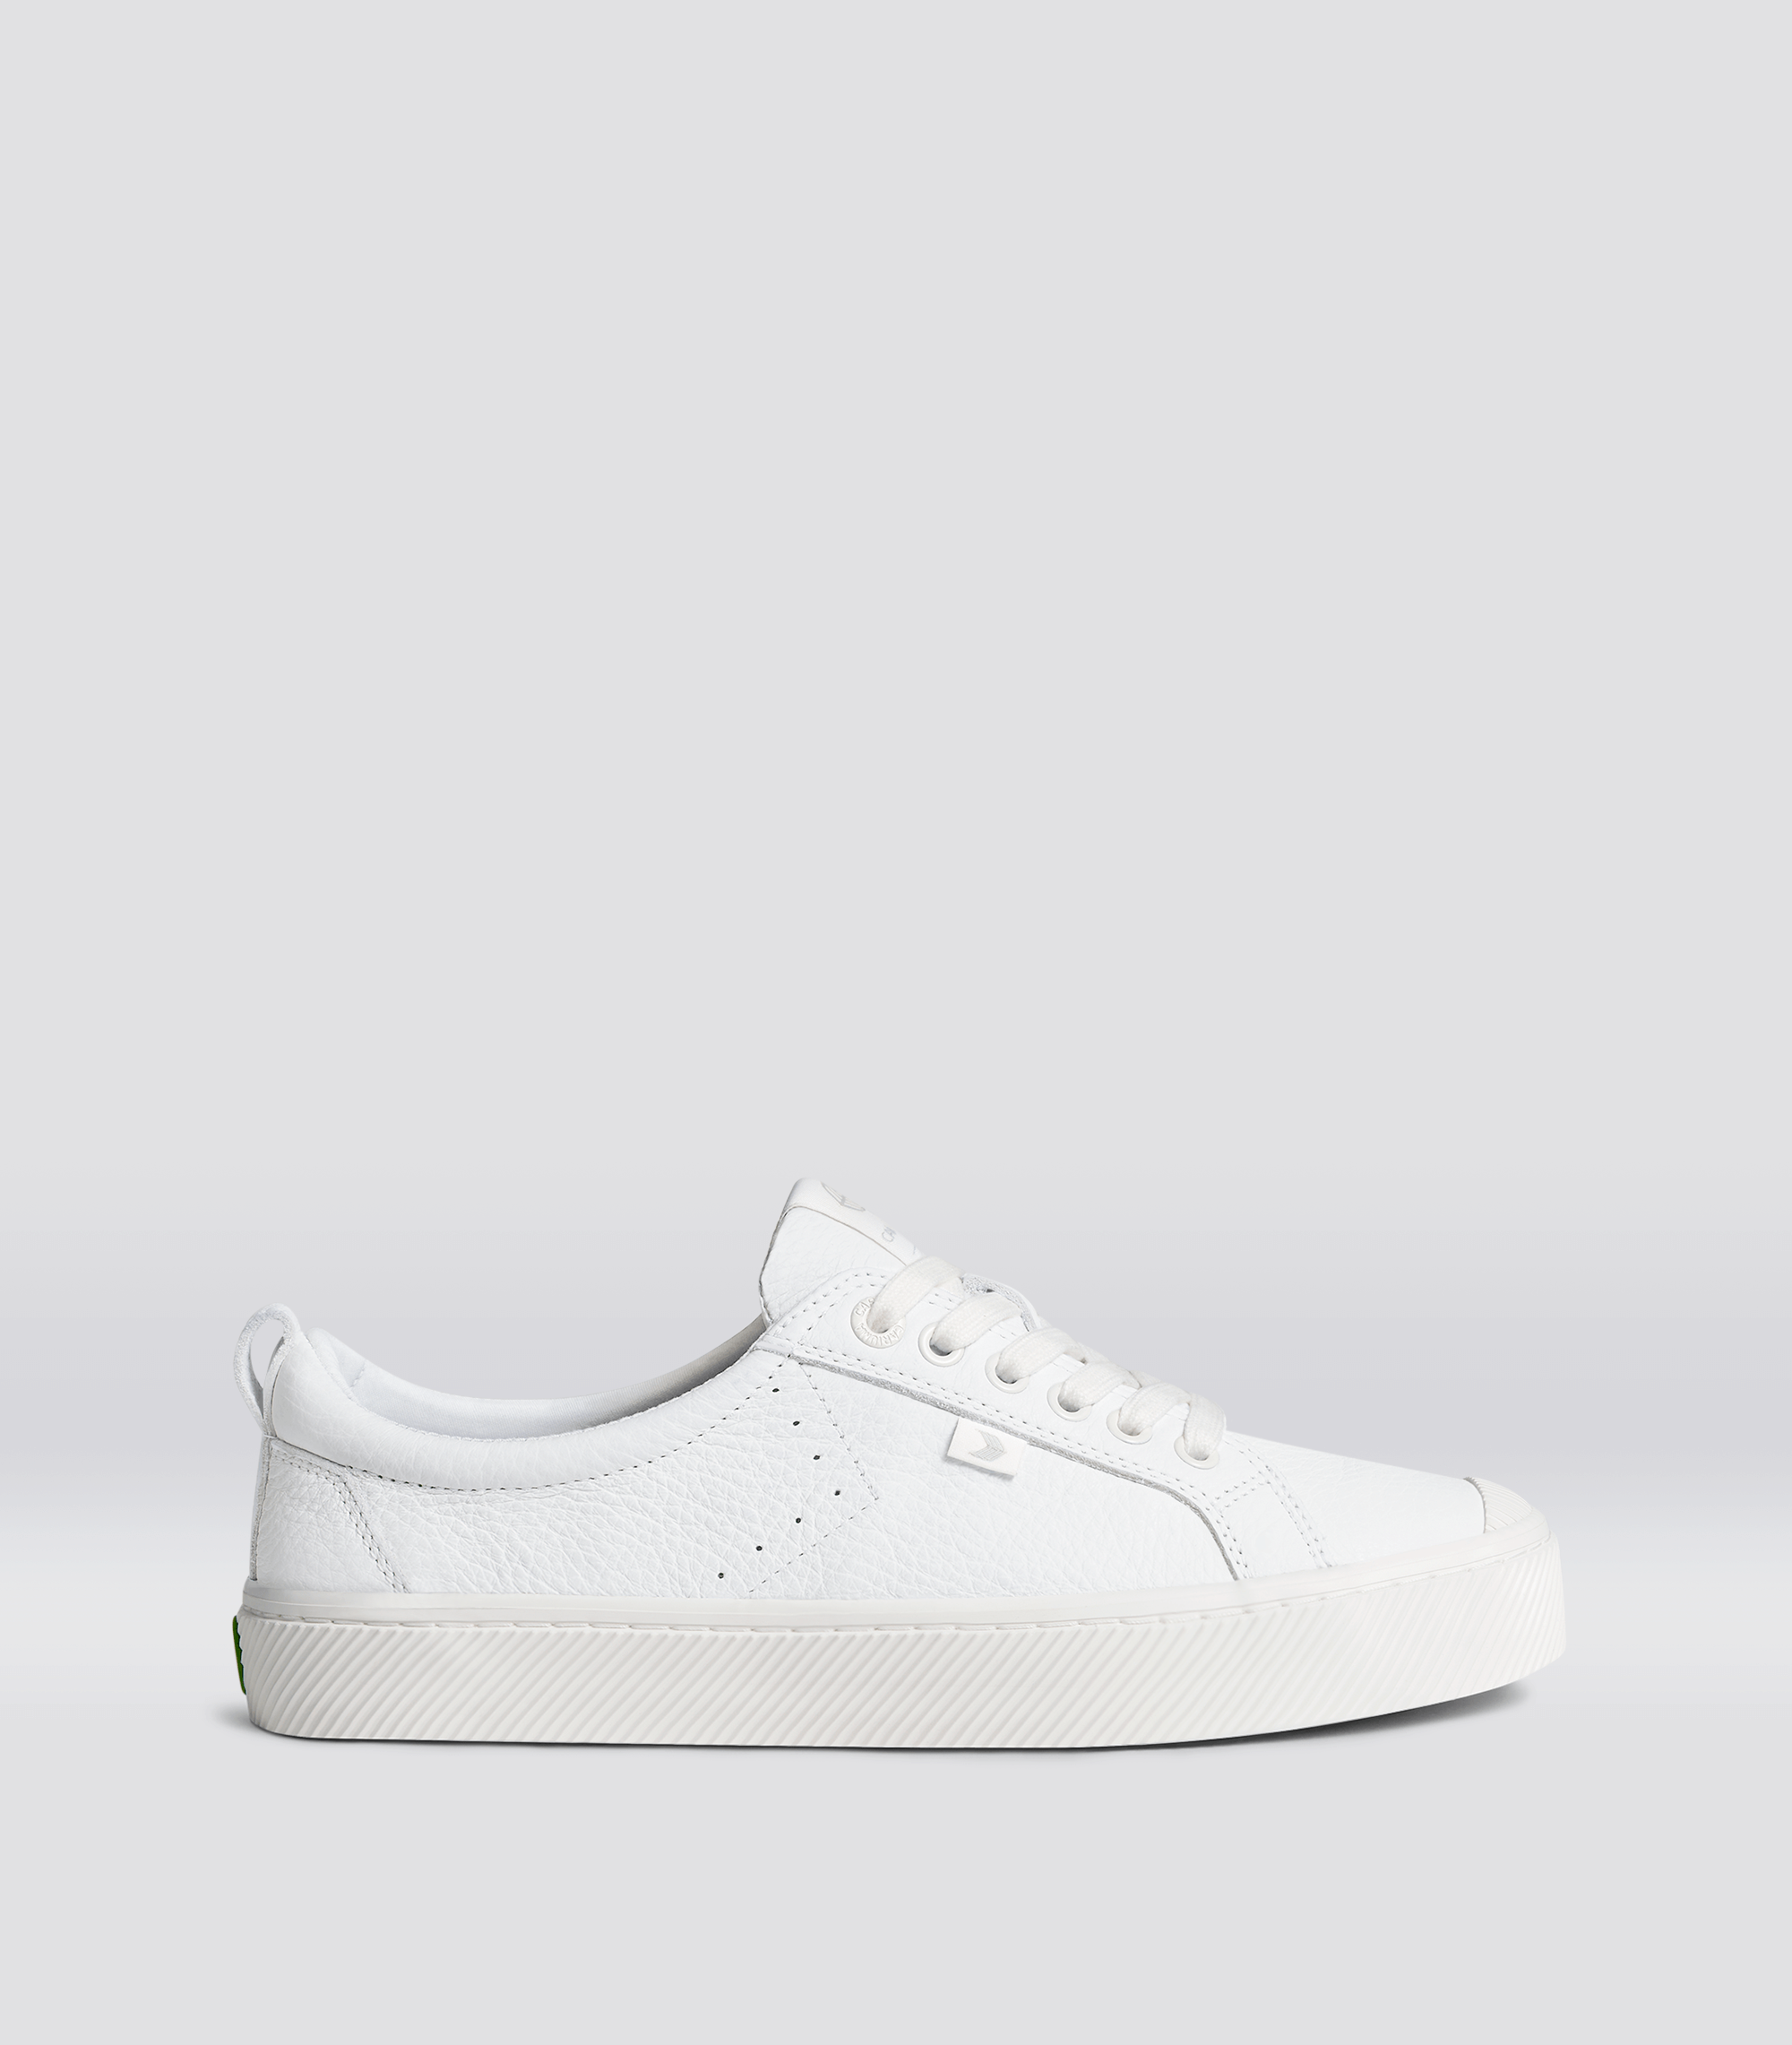 Lacoste lerond gold croc sneakers in white | ASOS